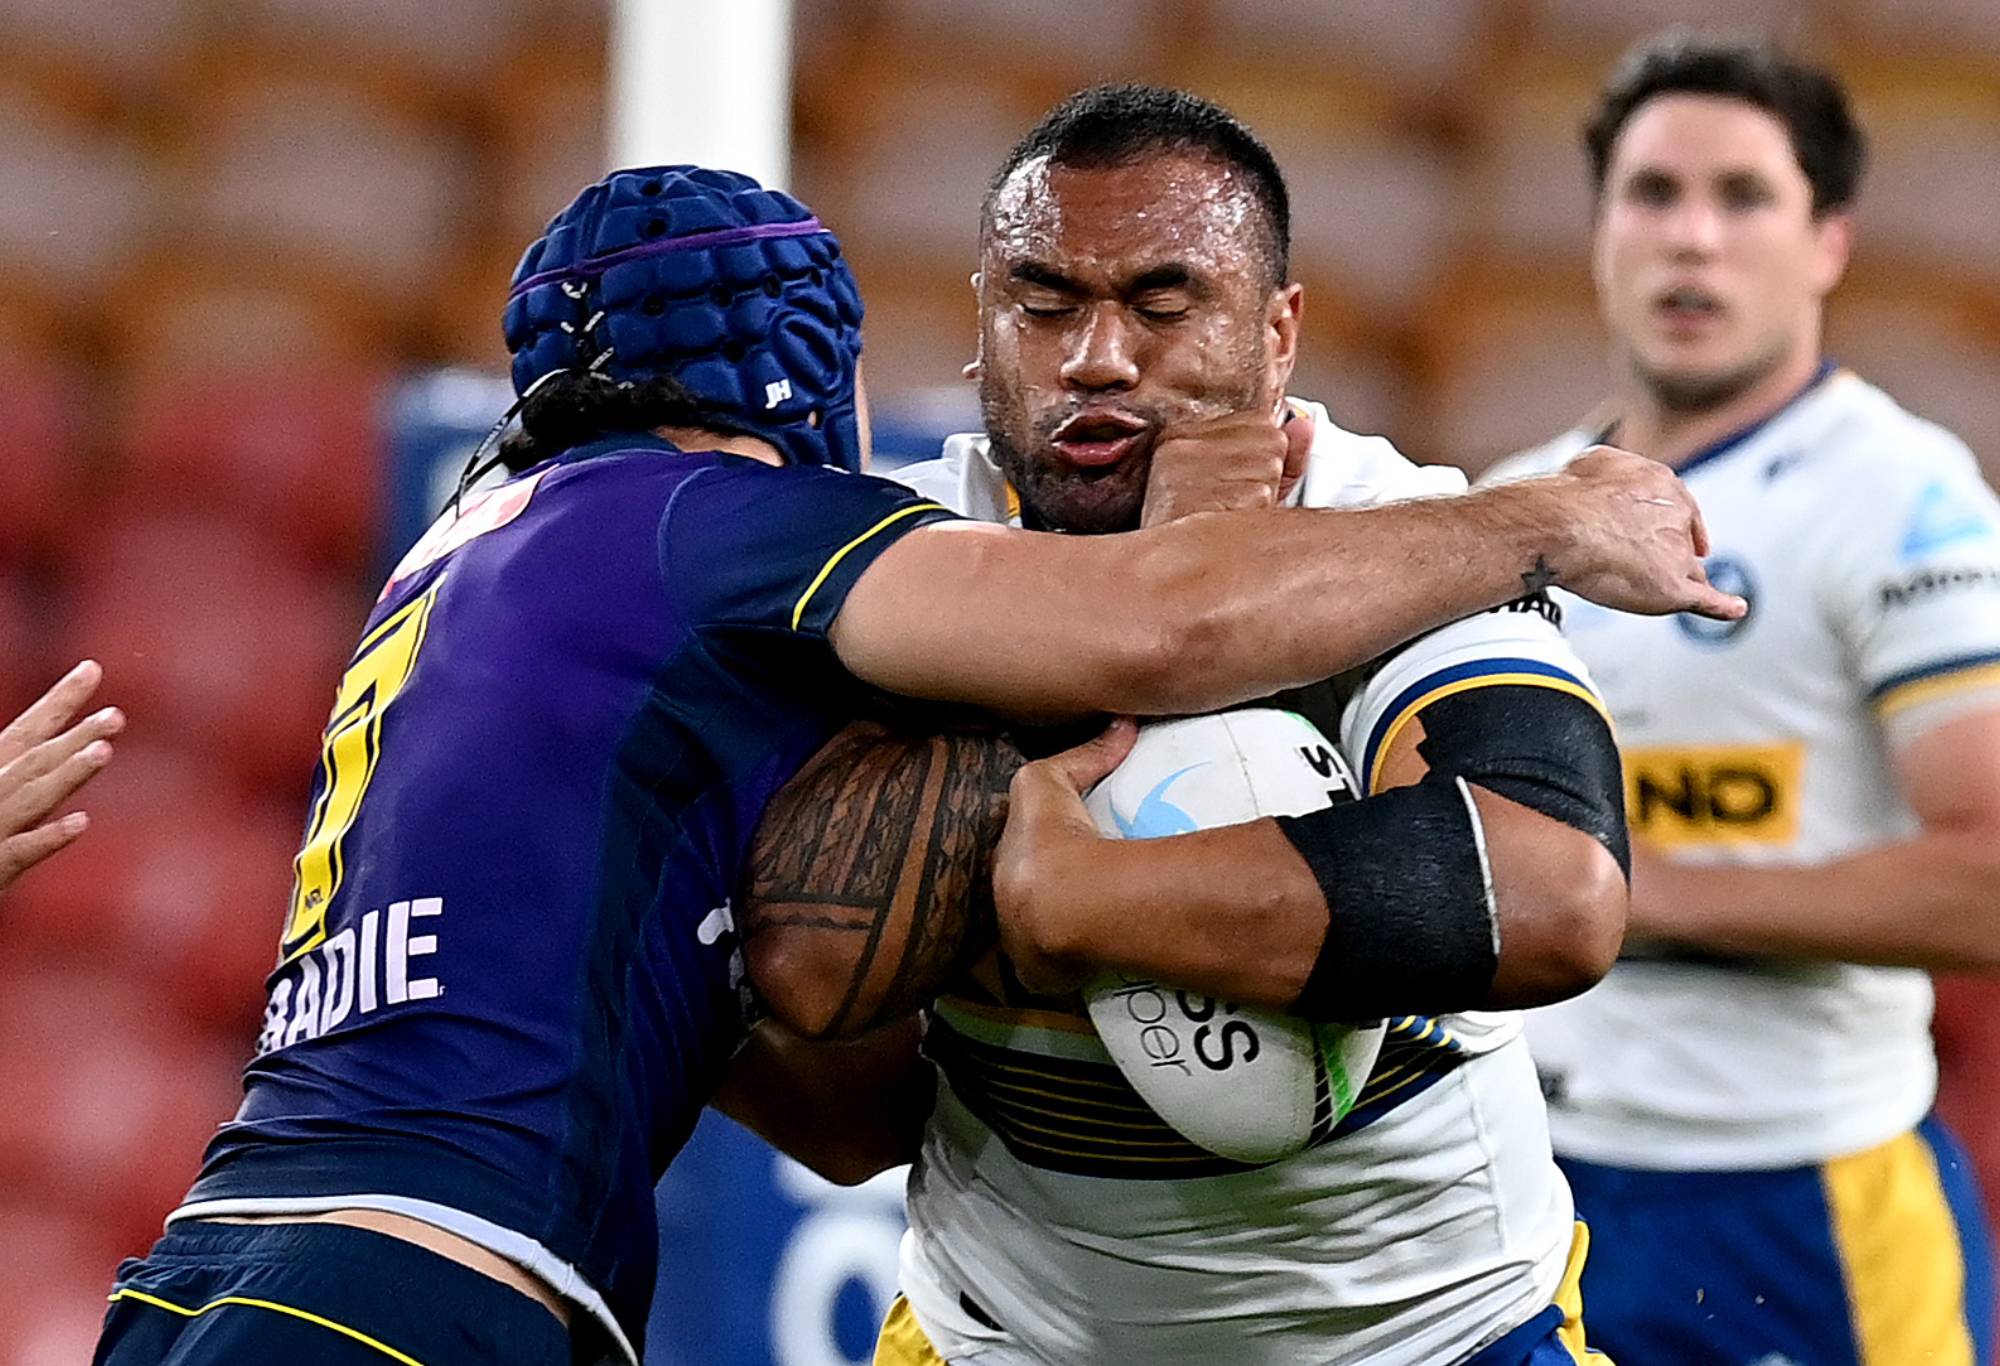 Junior Paulo of the Eels takes on the defence during the round 24 NRL match between the Melbourne Storm and the Parramatta Eels at Suncorp Stadium, on August 28, 2021, in Brisbane, Australia. (Photo by Bradley Kanaris/Getty Images)